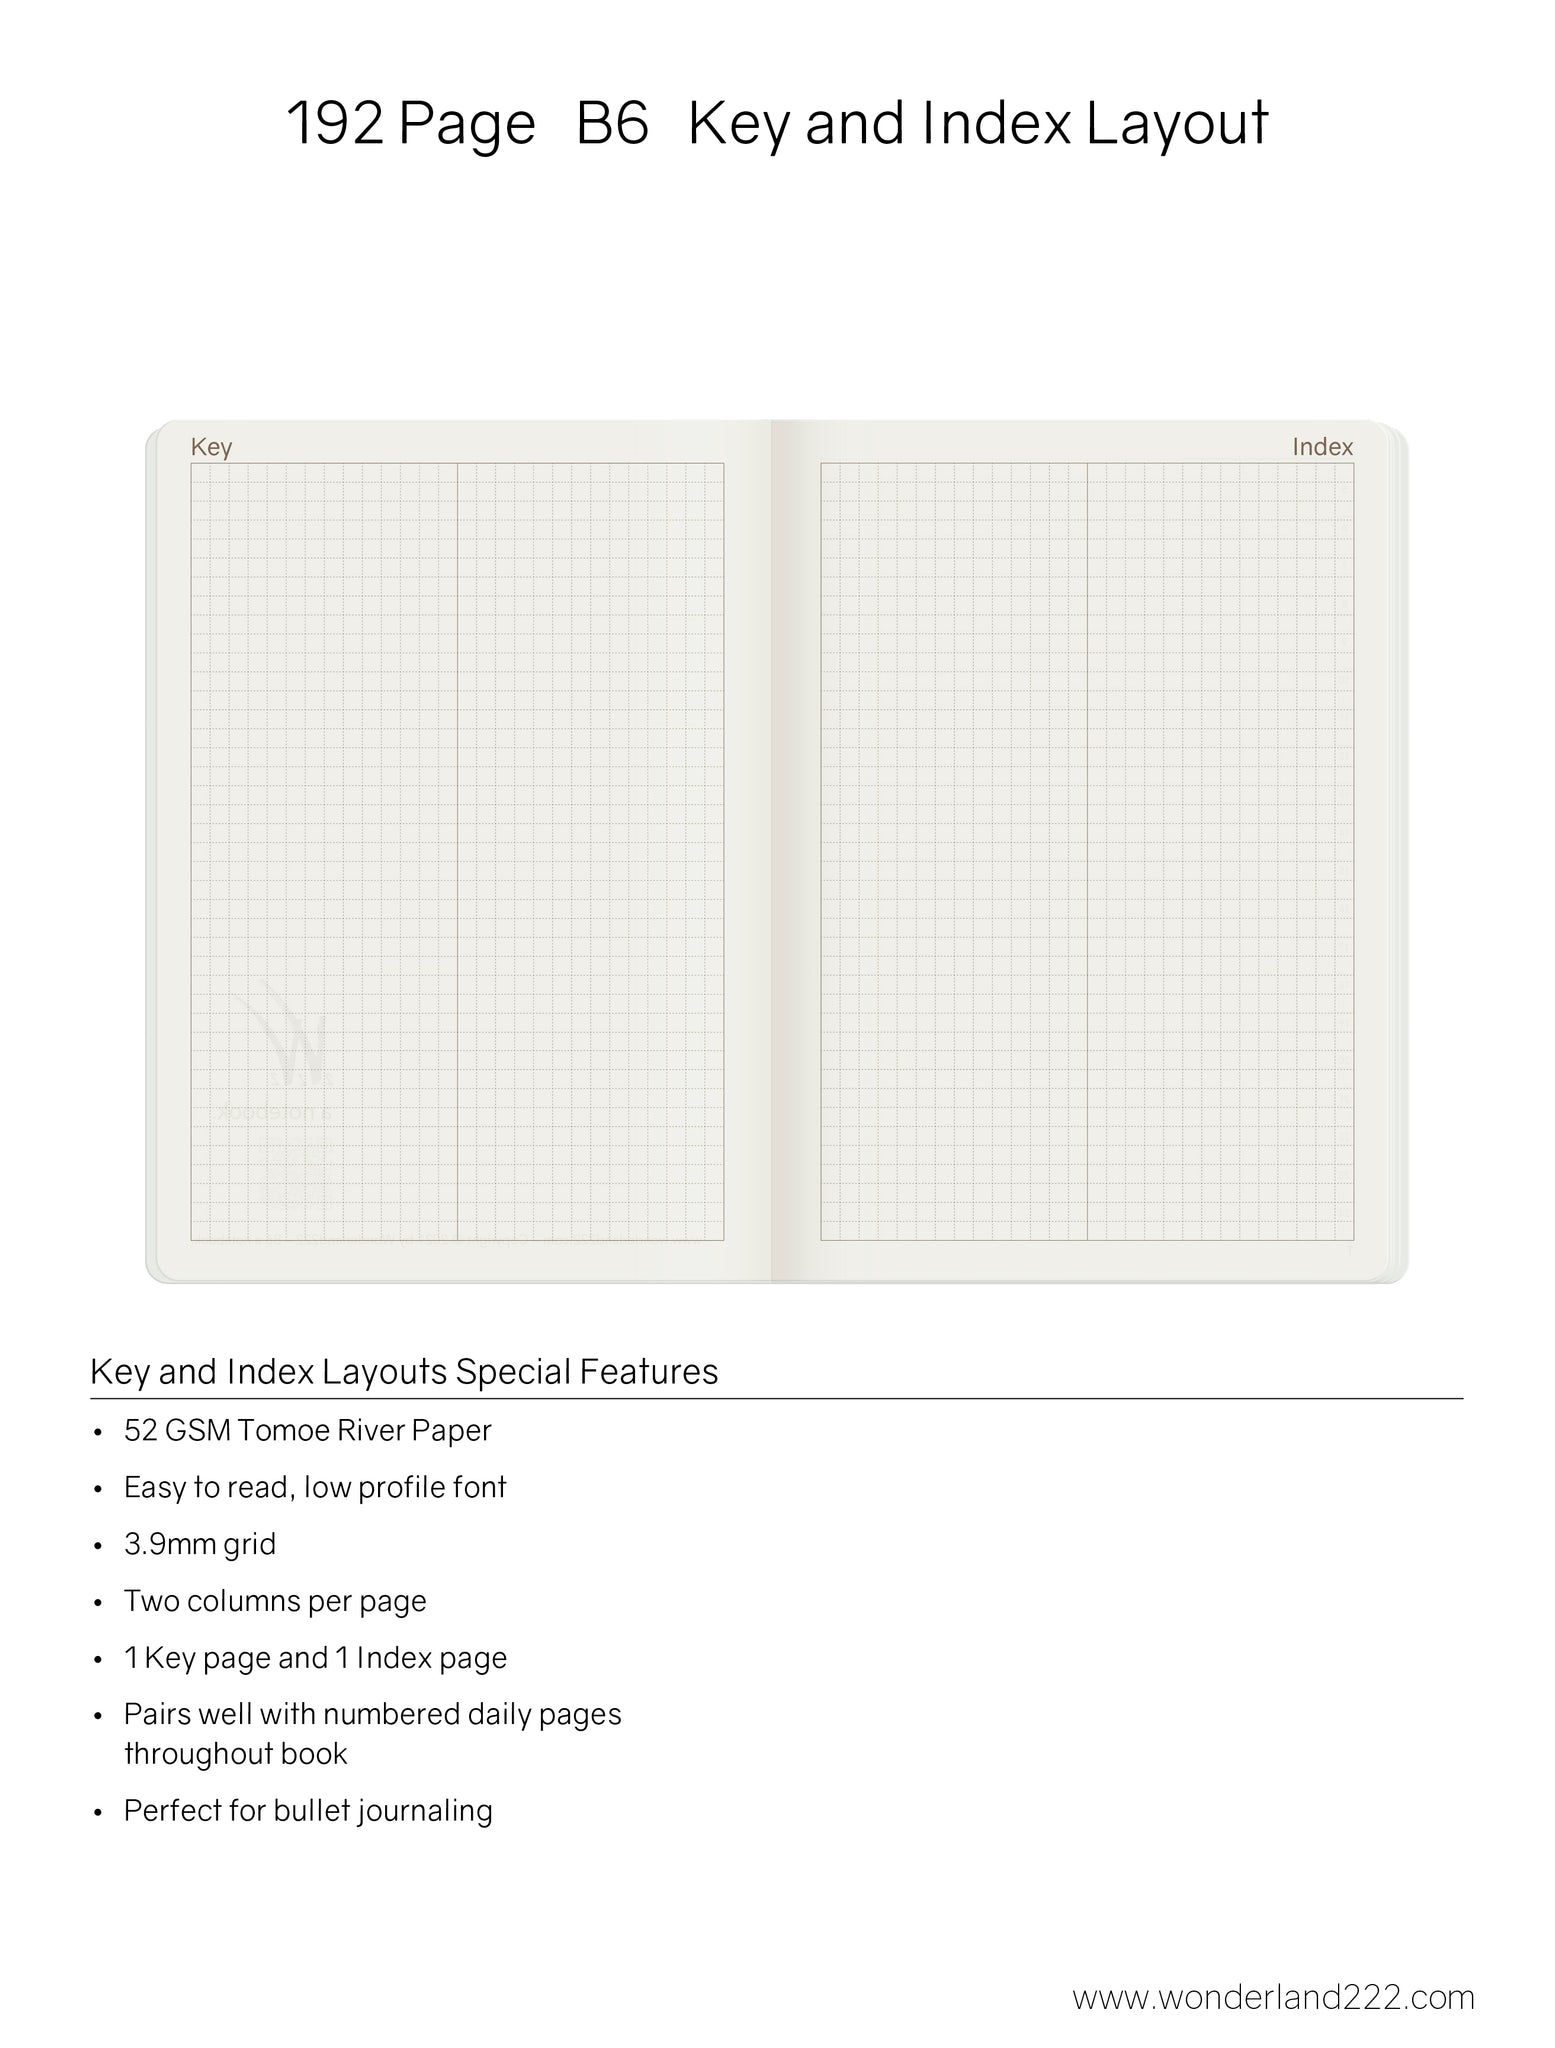 B6 Notebook (192 pages) - 2022 Edition